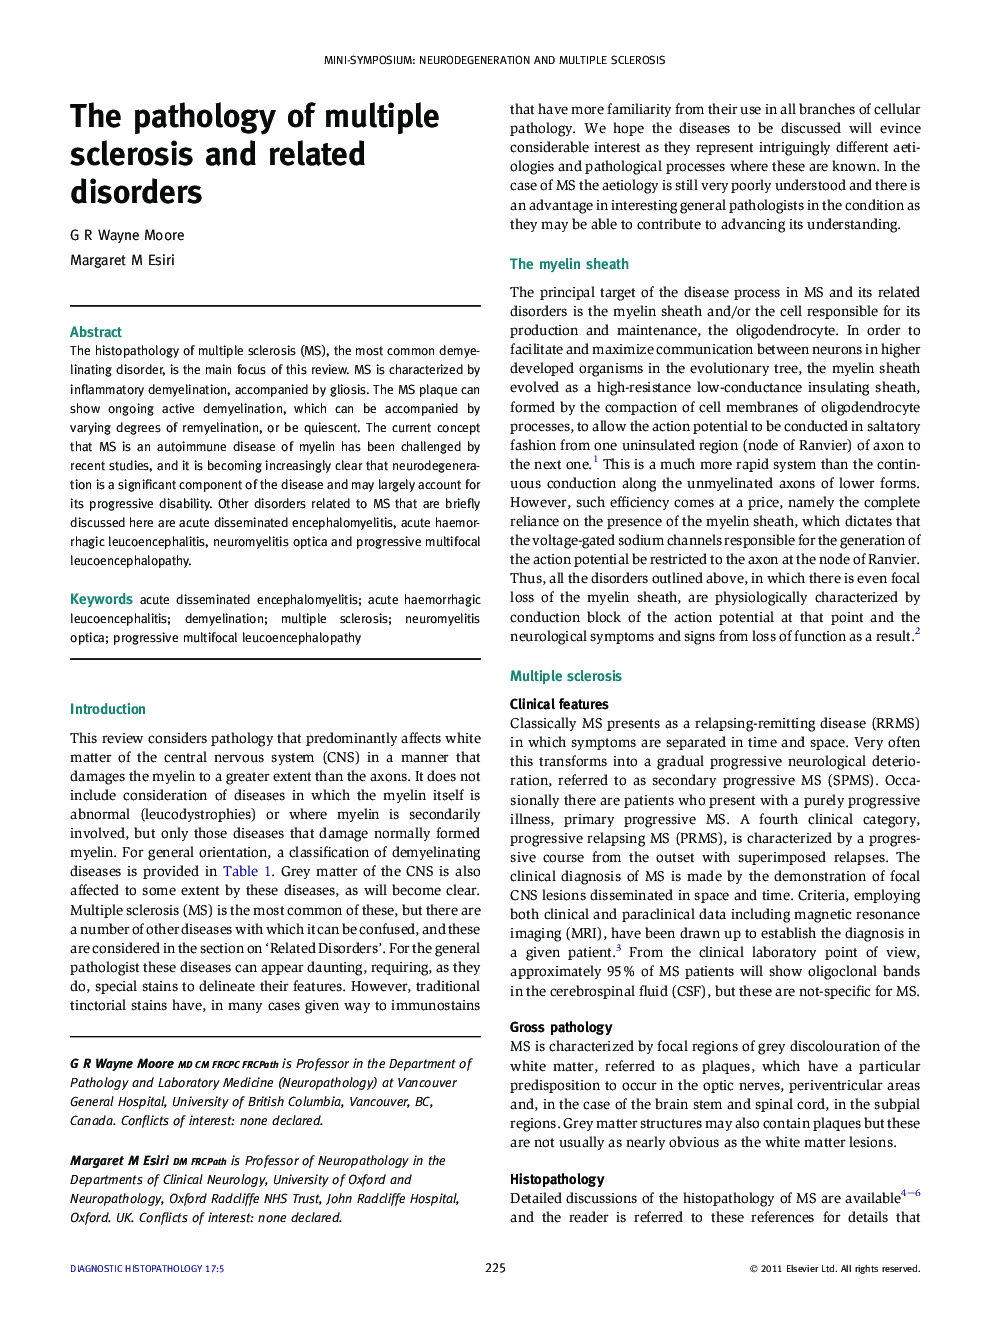 The pathology of multiple sclerosis and related disorders